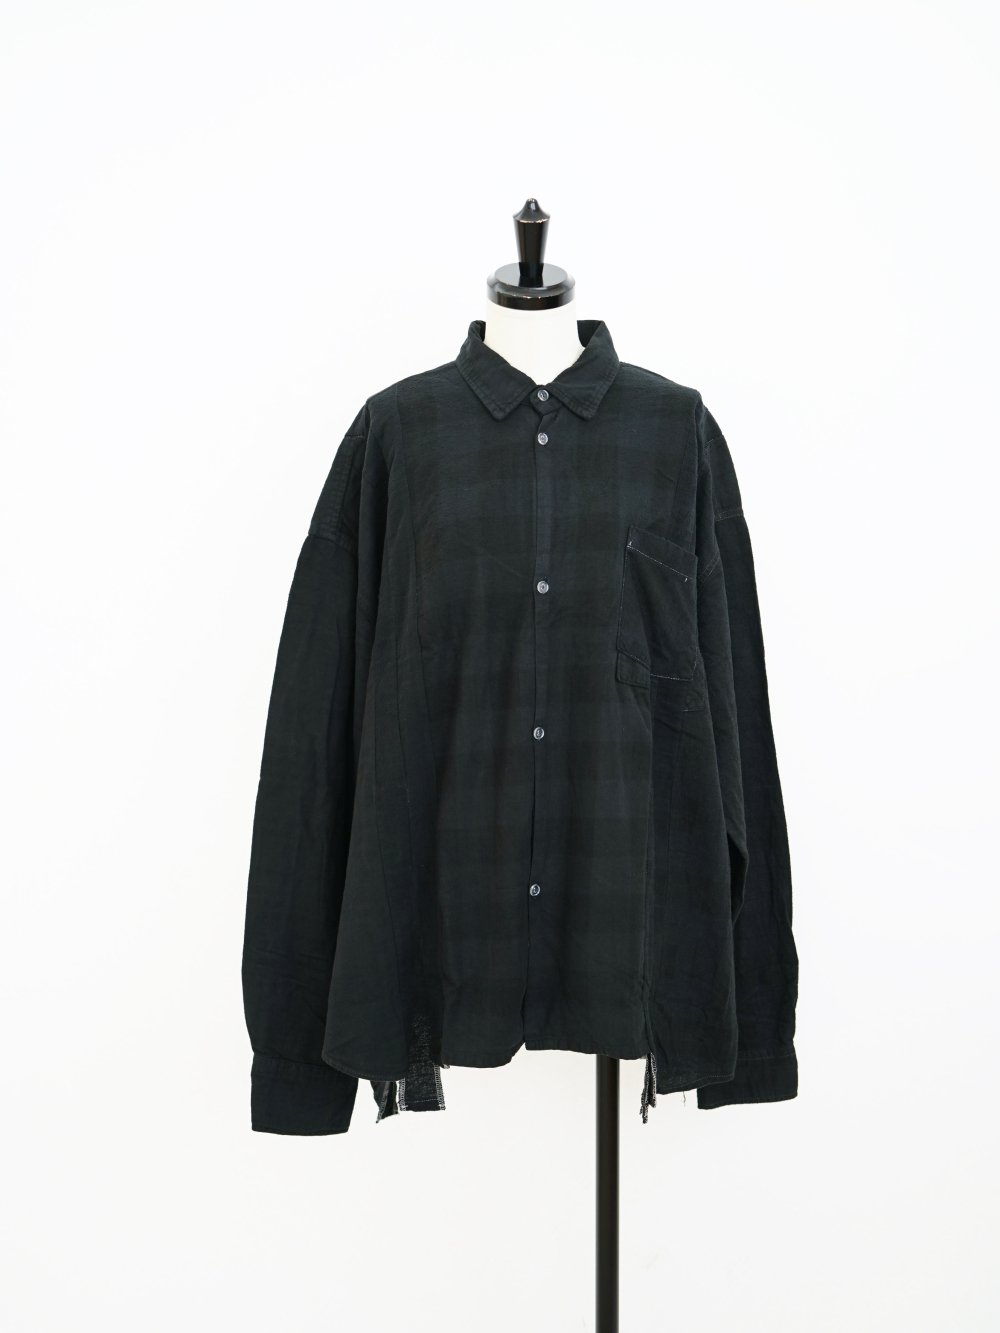 REBUILD BY NEEDLES FLANNEL SHIRT->7 CUTS WIDE SHIRT/OVER DYE